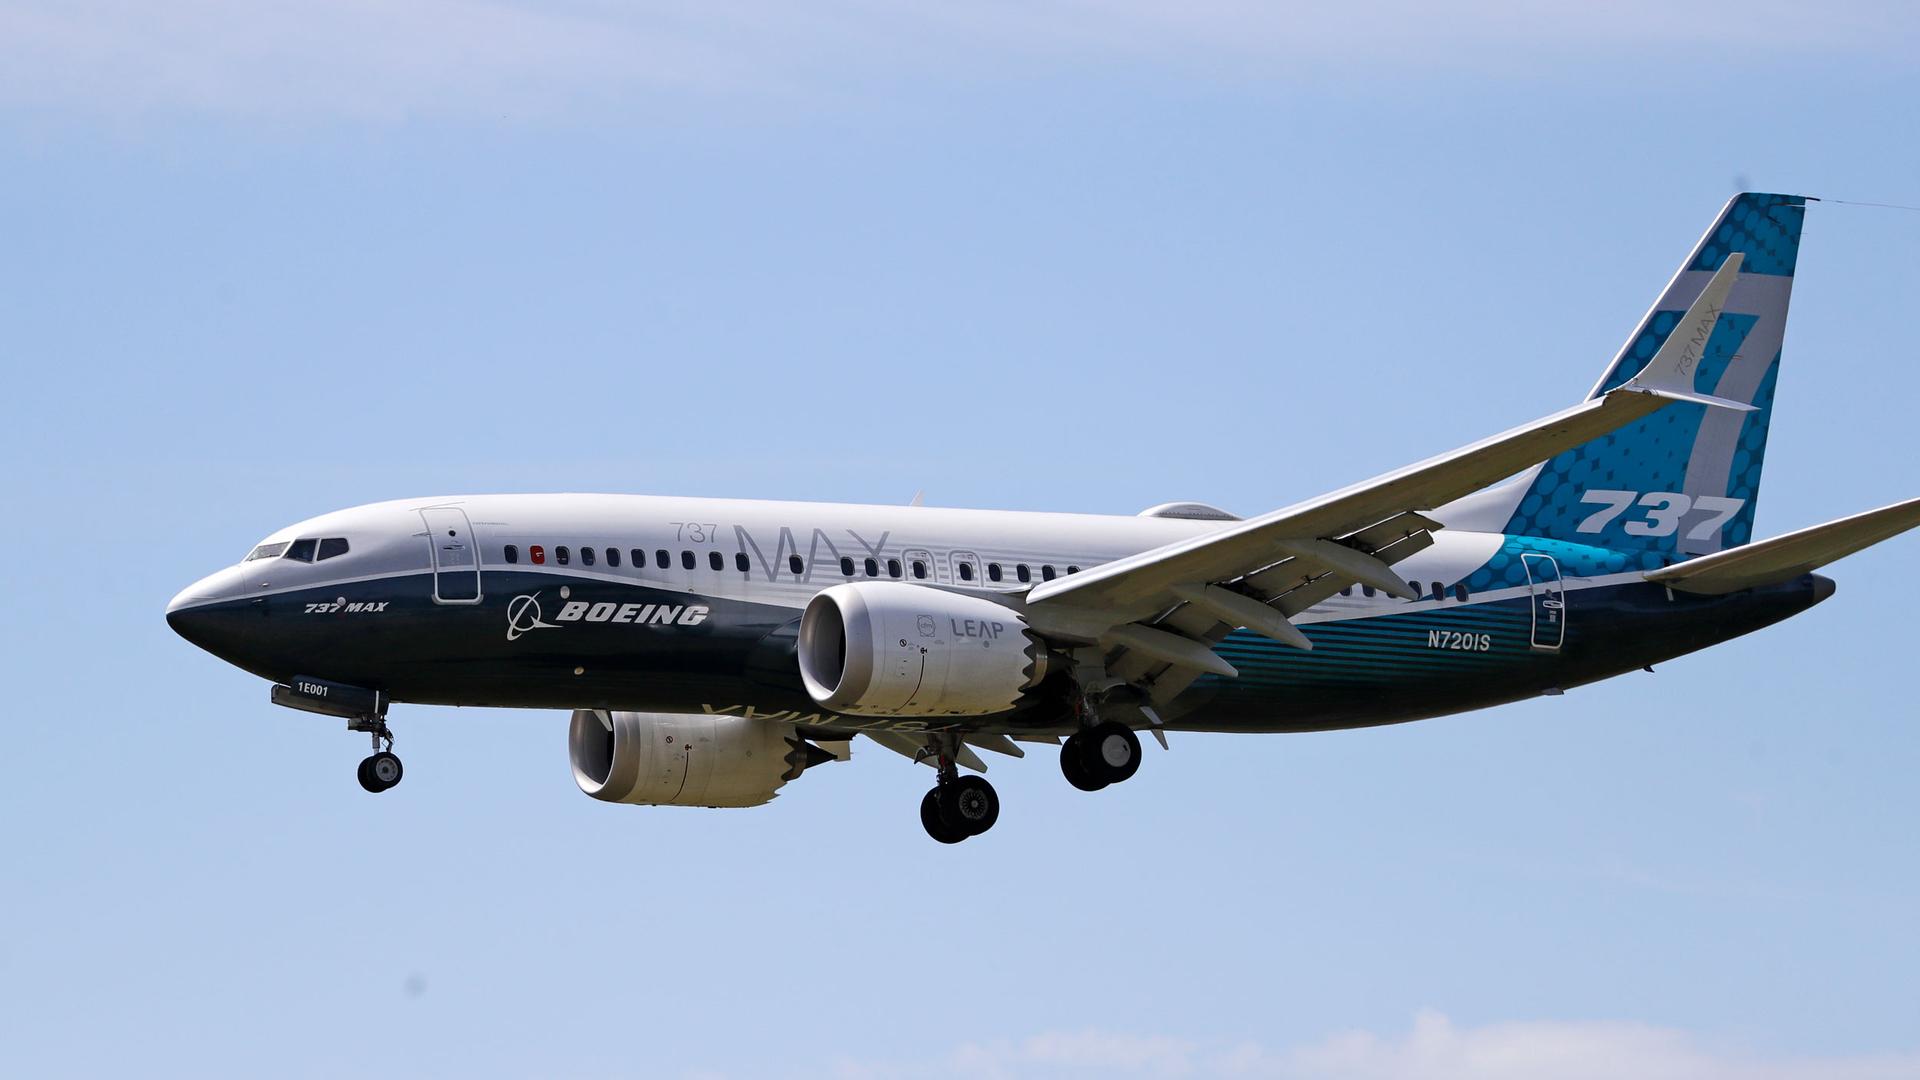 A Boeing 737 Max jet is shown in the air with its wheels down prepared for a landing.